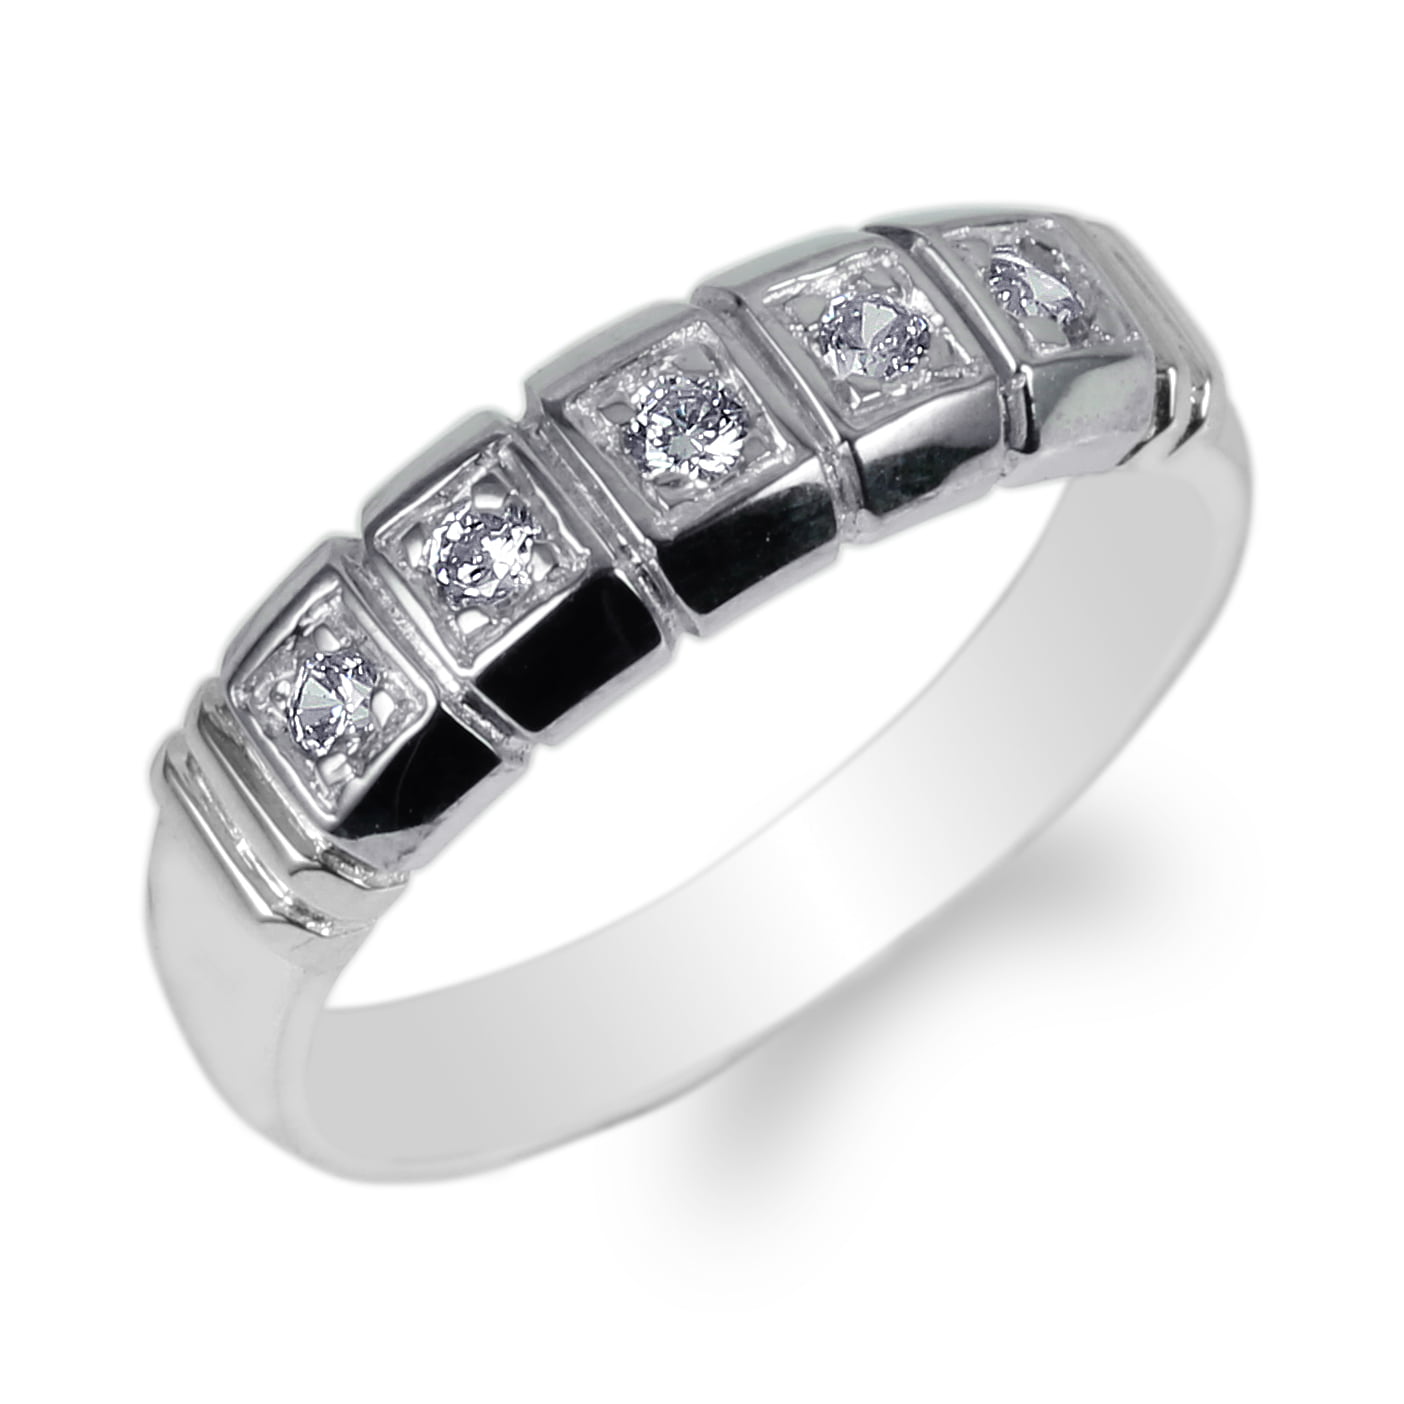 JamesJenny Mens White Gold Plated Round CZ Embedded Pattern Band Ring Size 7-12 